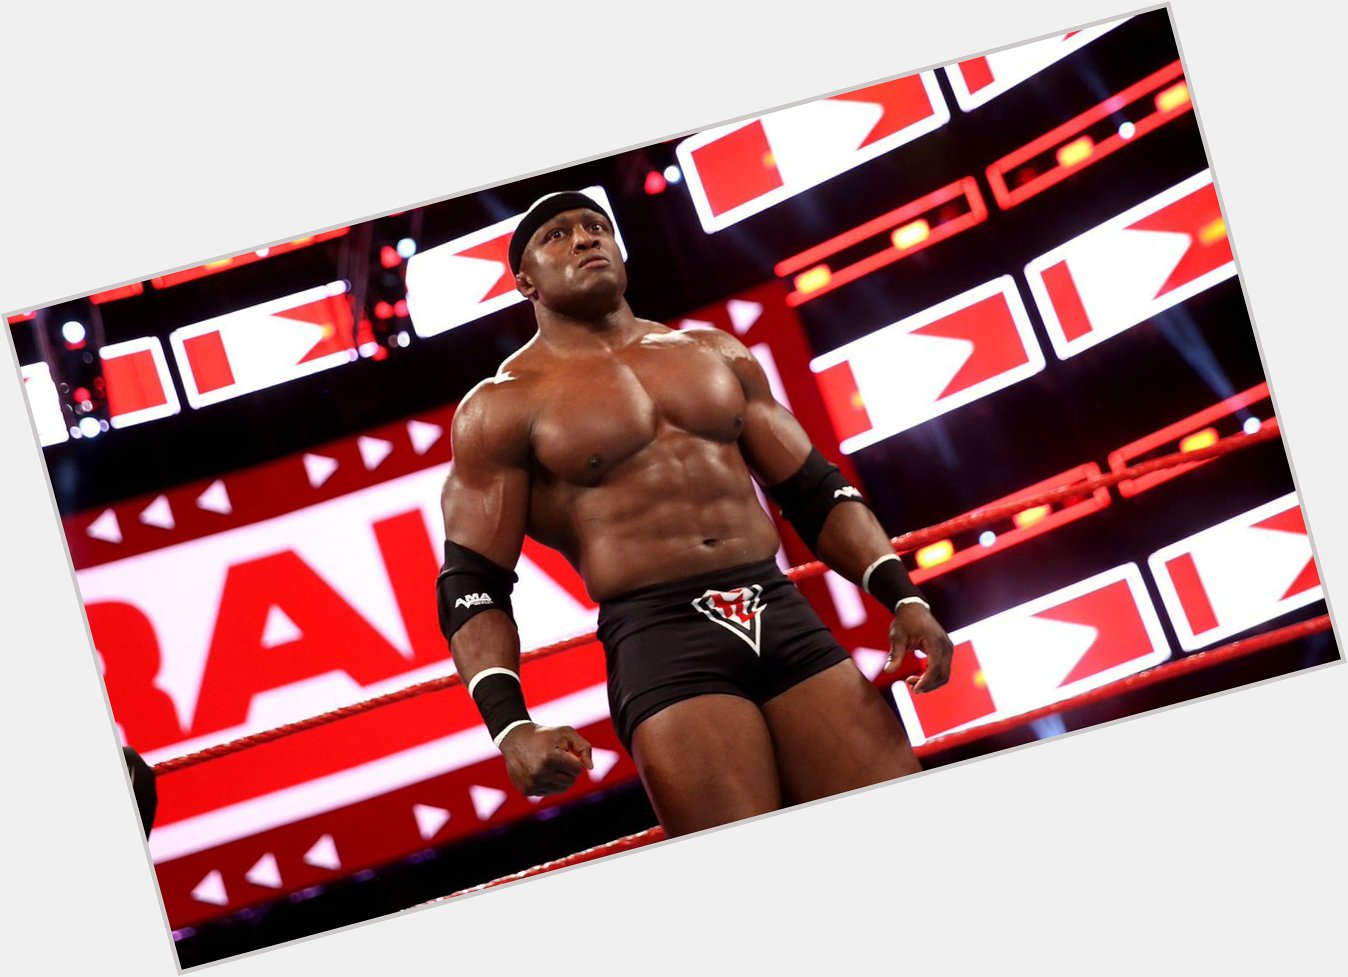 The Beermat wishes Bobby Lashley a happy birthday. 

Have a good one 